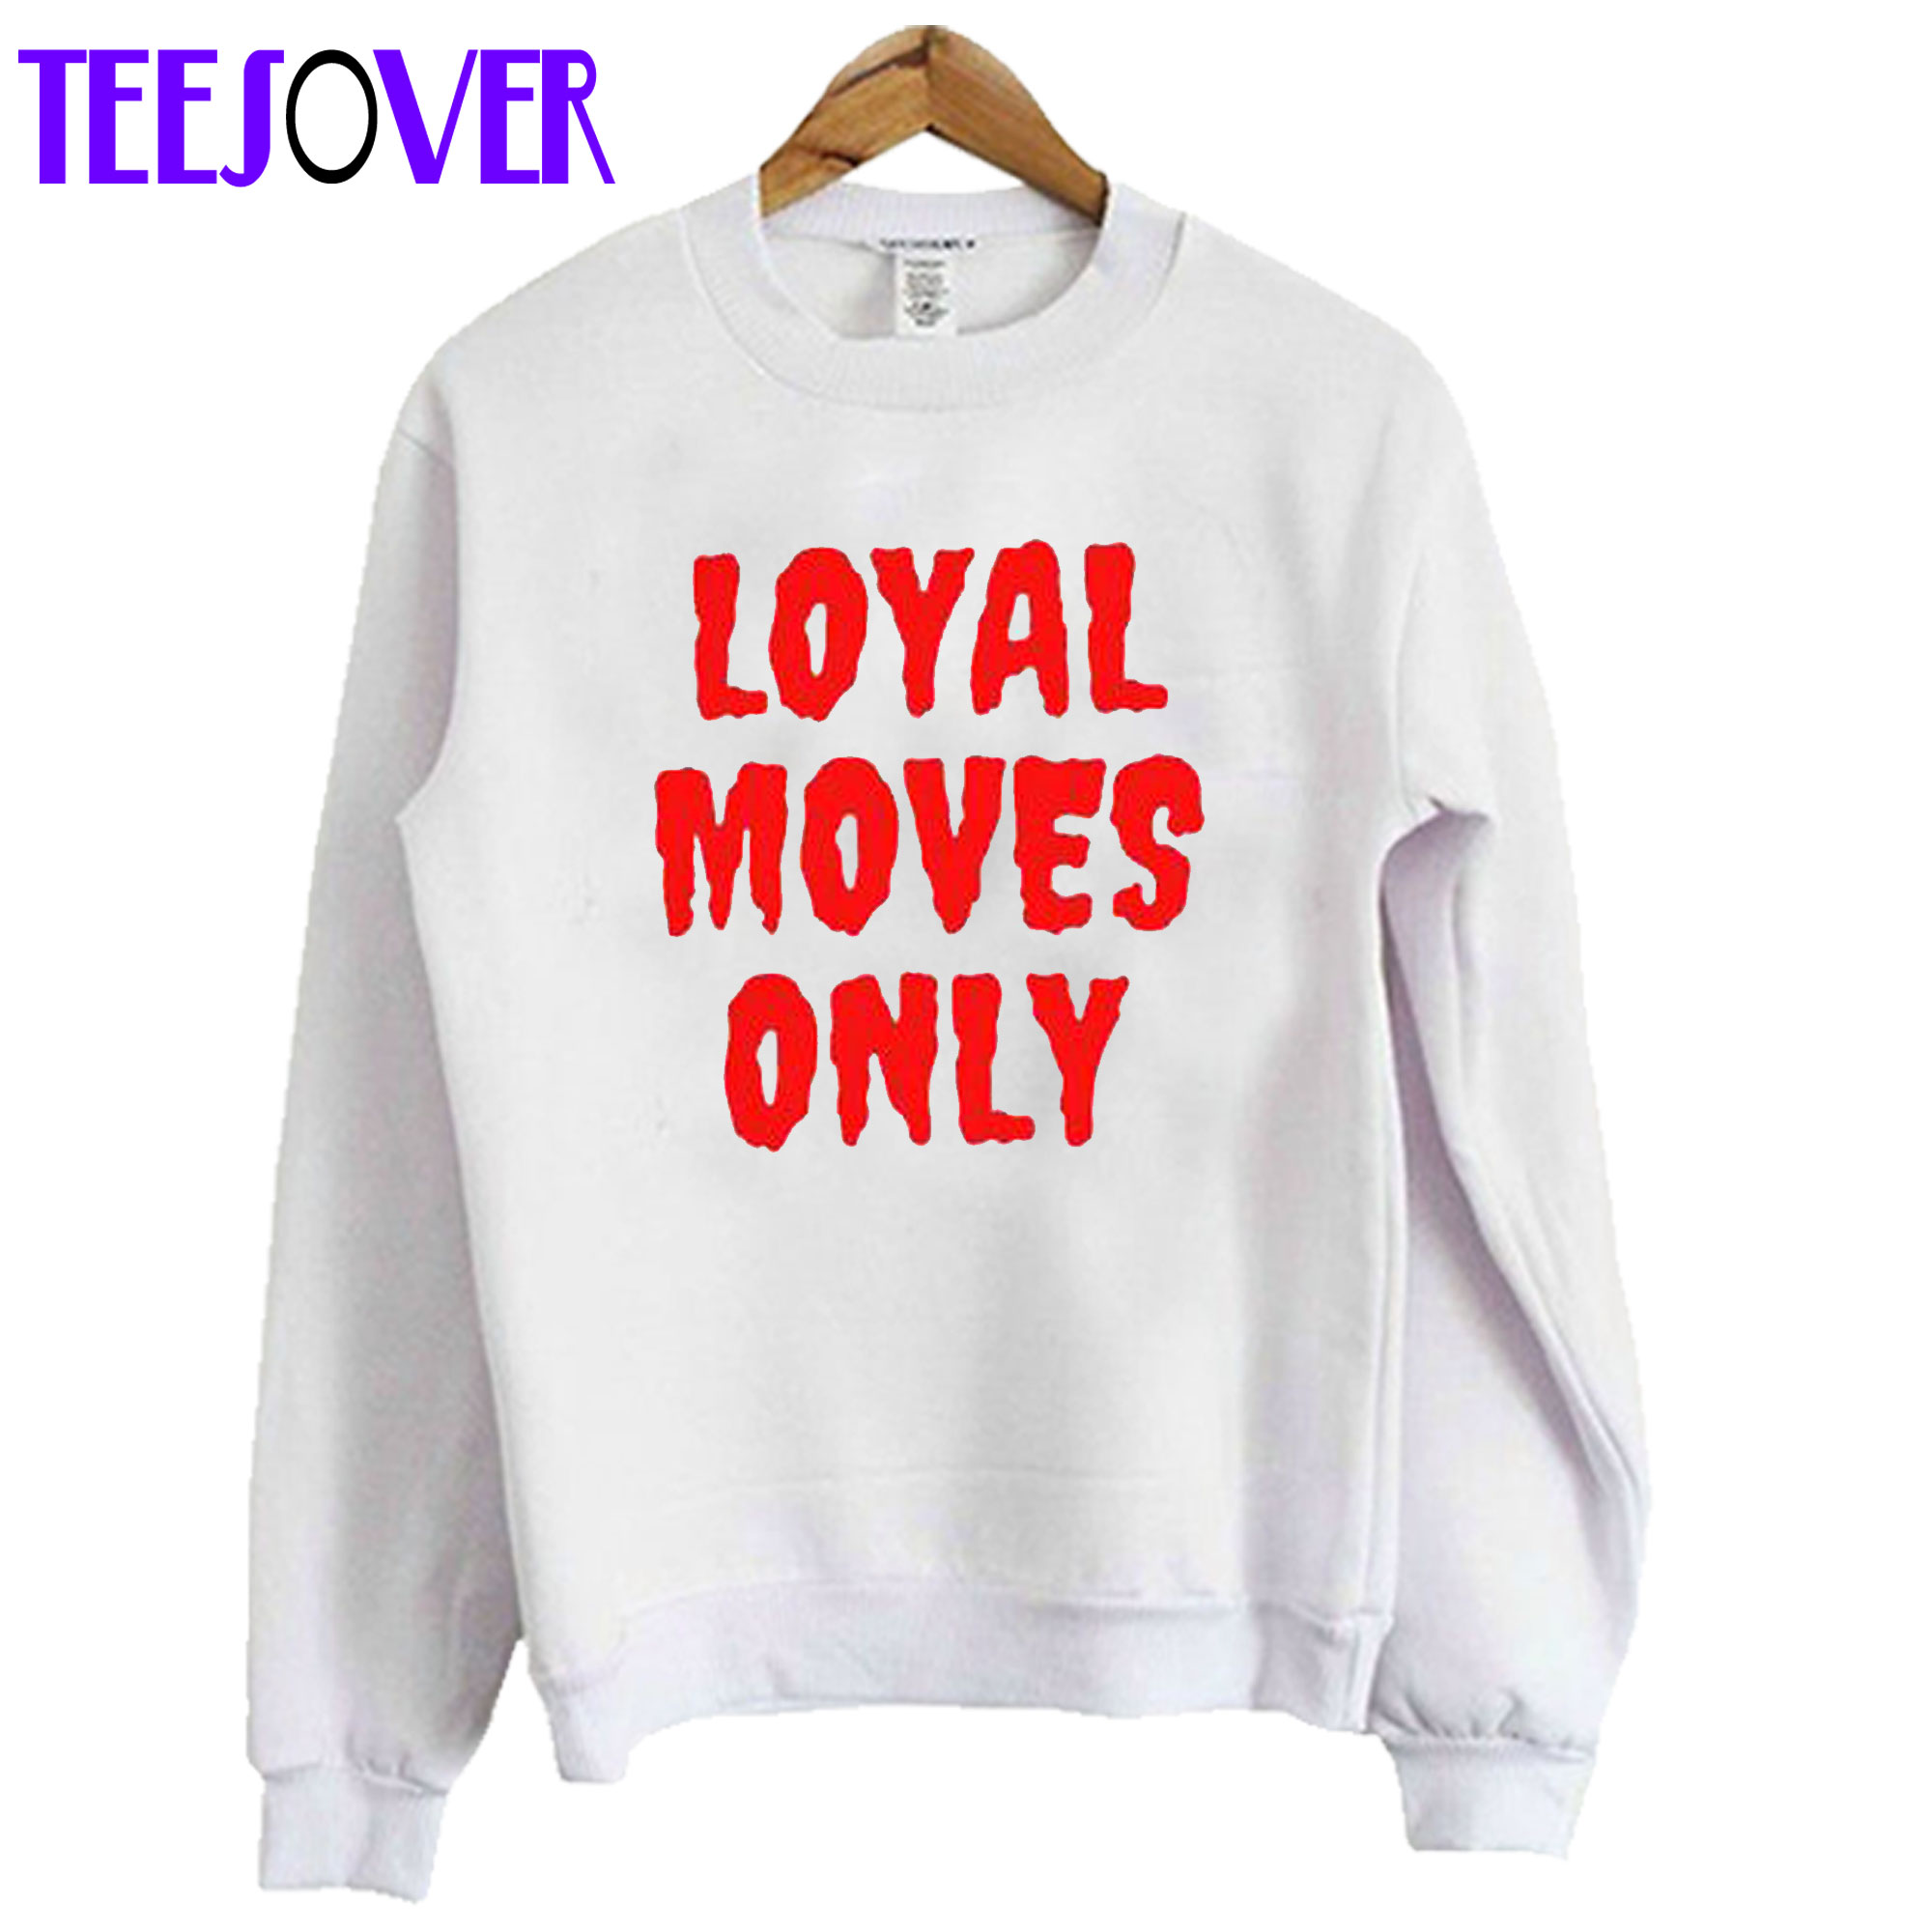 Loyal Moves Only Sweatshirt